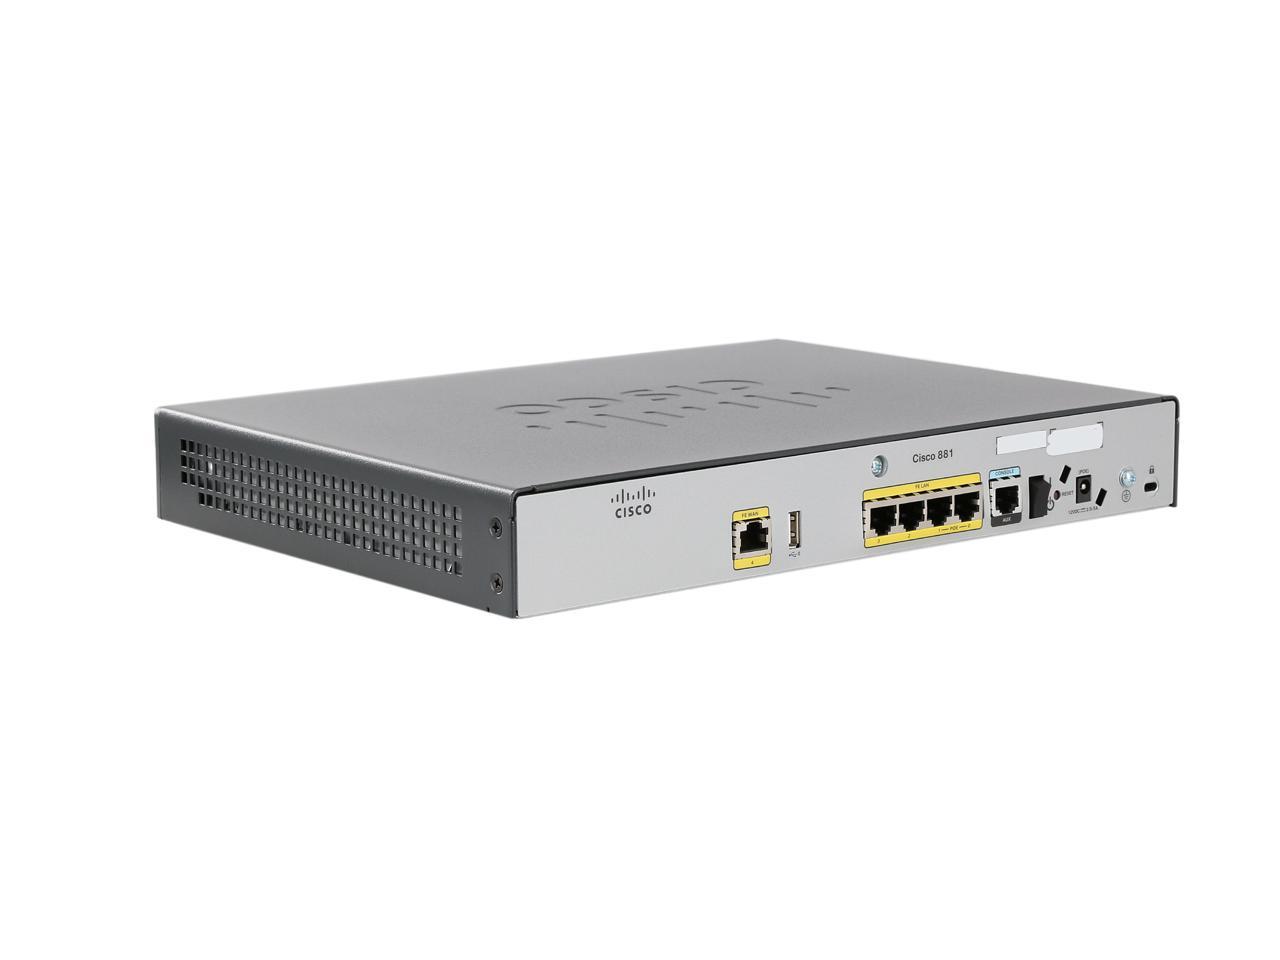 CISCO C881 Wired Ethernet Security Router C881-K9 - Newegg.com